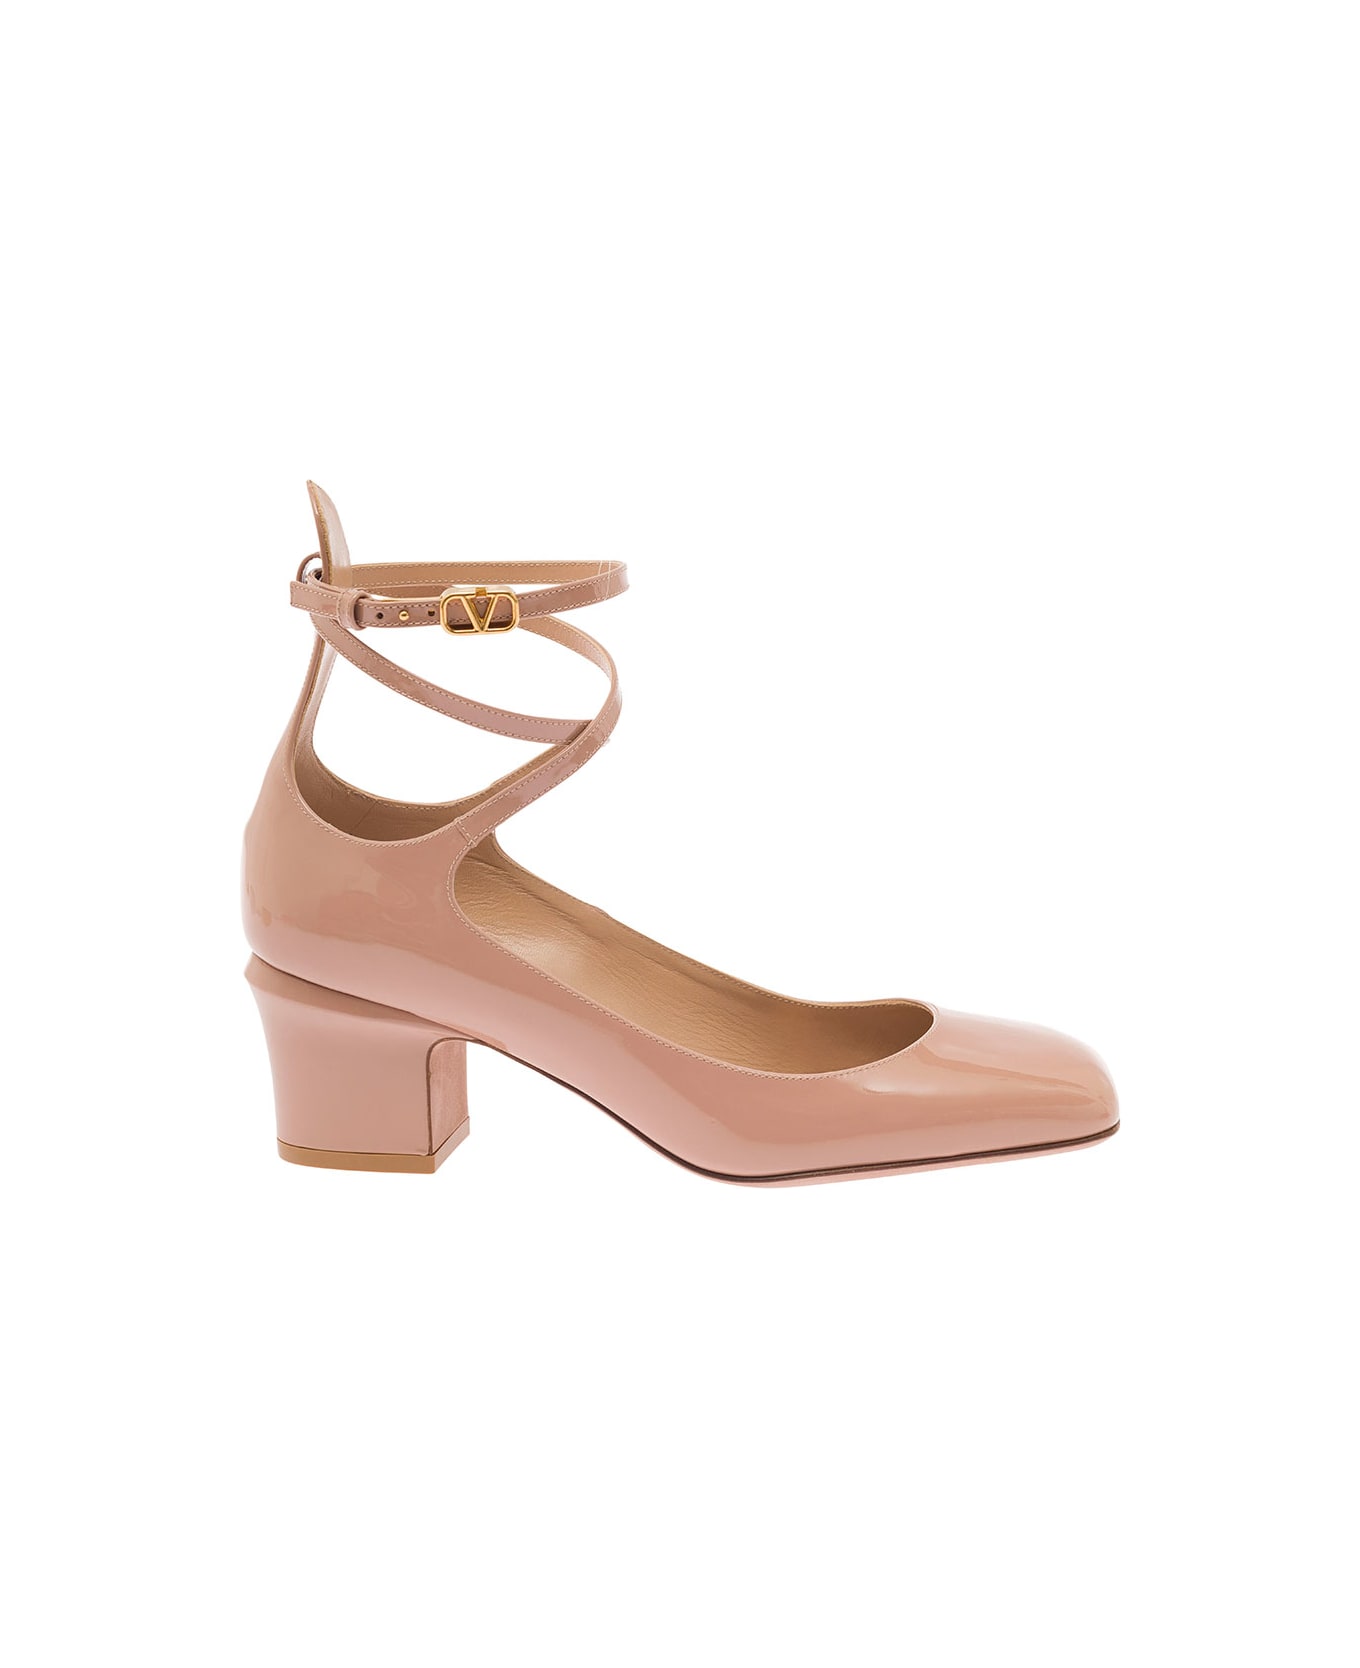 Valentino Garavani 'tan-go' Bege Décolleté With V-logo Buckle In Patent Leather Woman - Beige ハイヒール